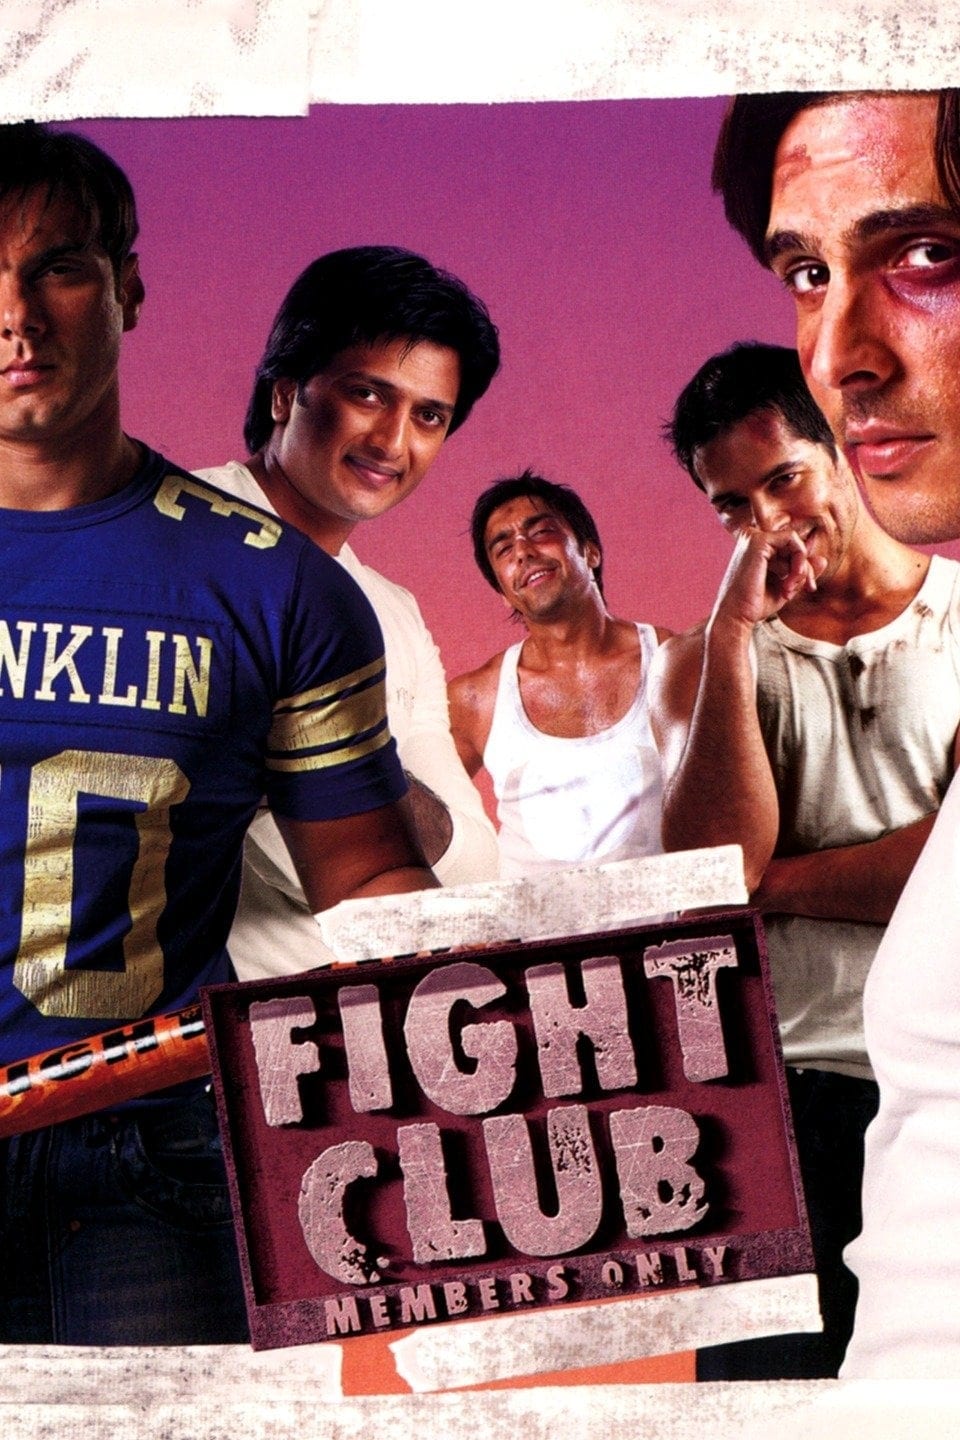 Poster for the movie "Fight Club: Members Only"